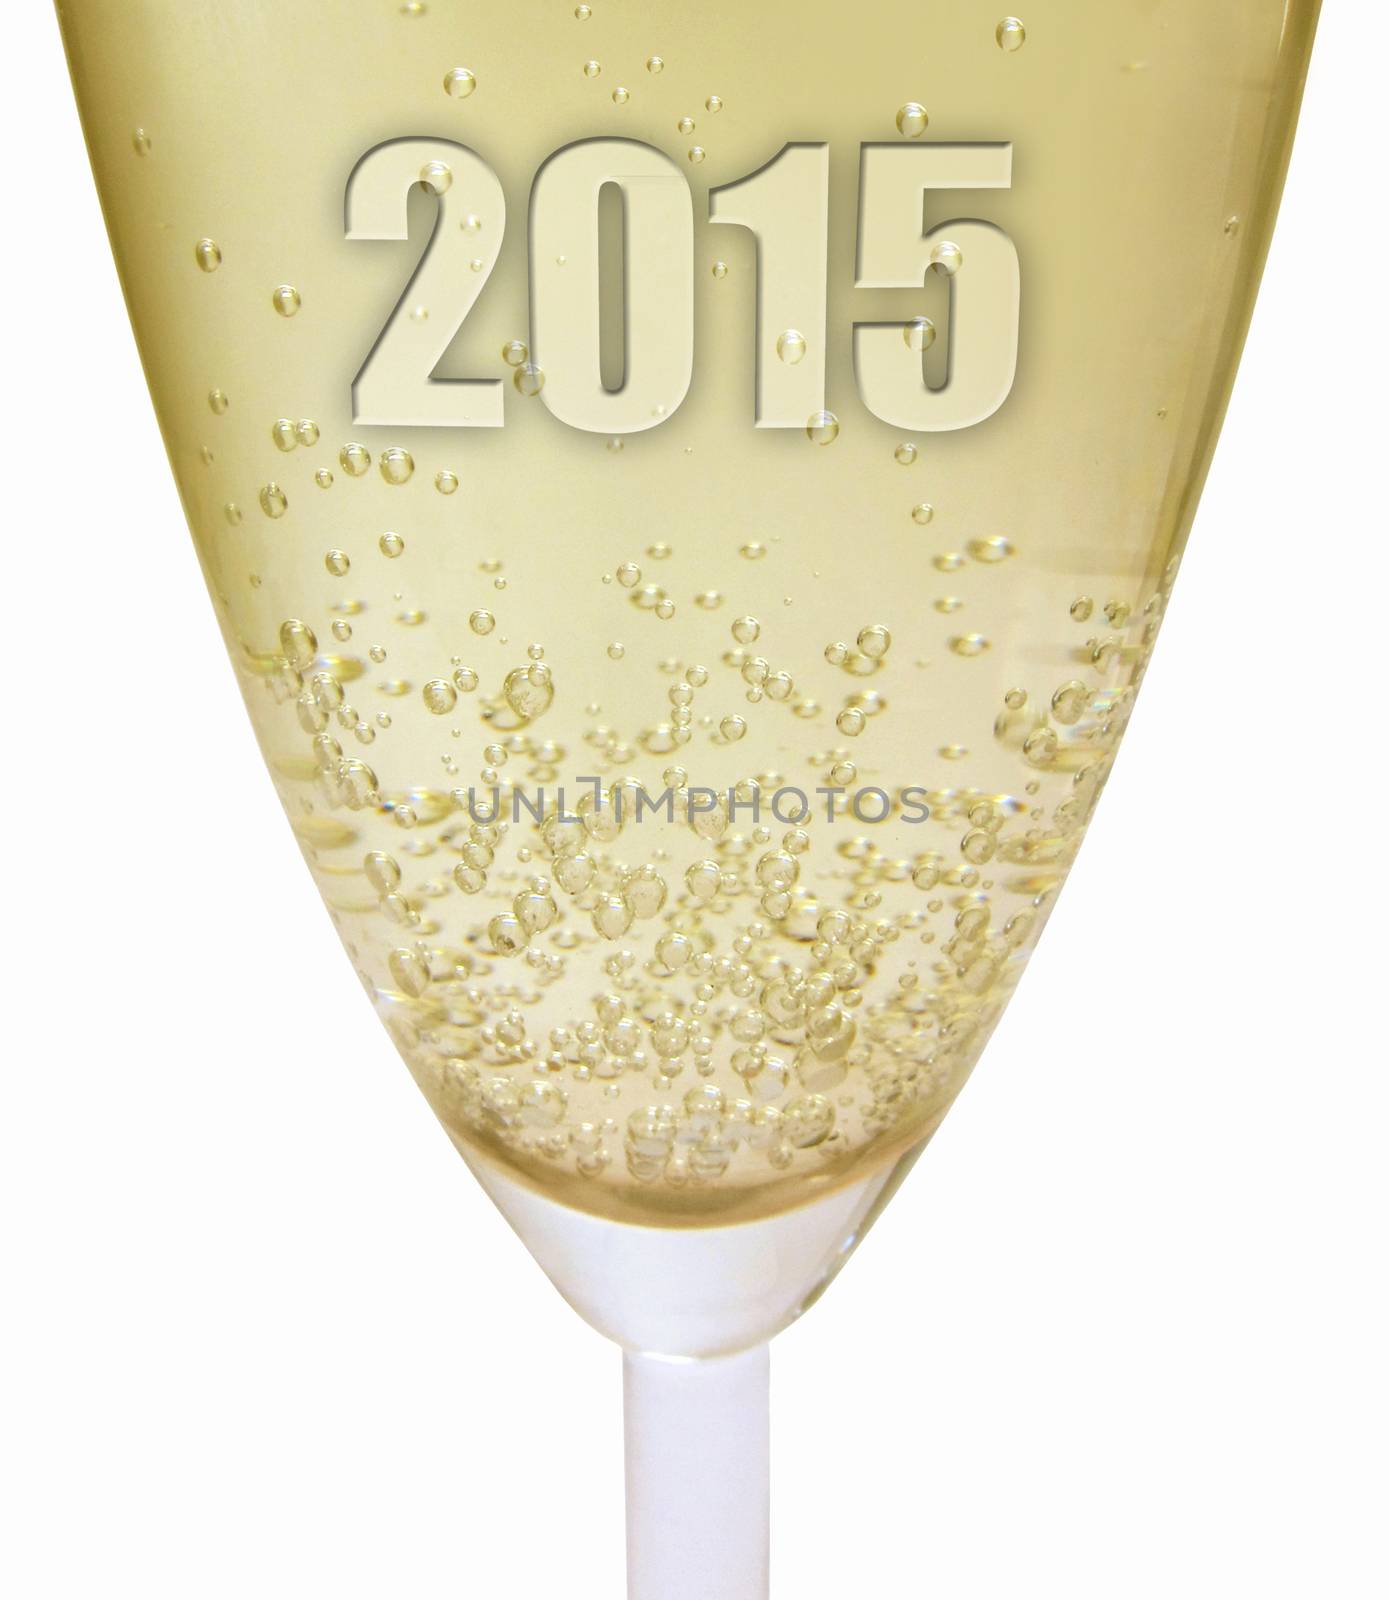 Closeup of a glass of freshly poured champagne with 2015